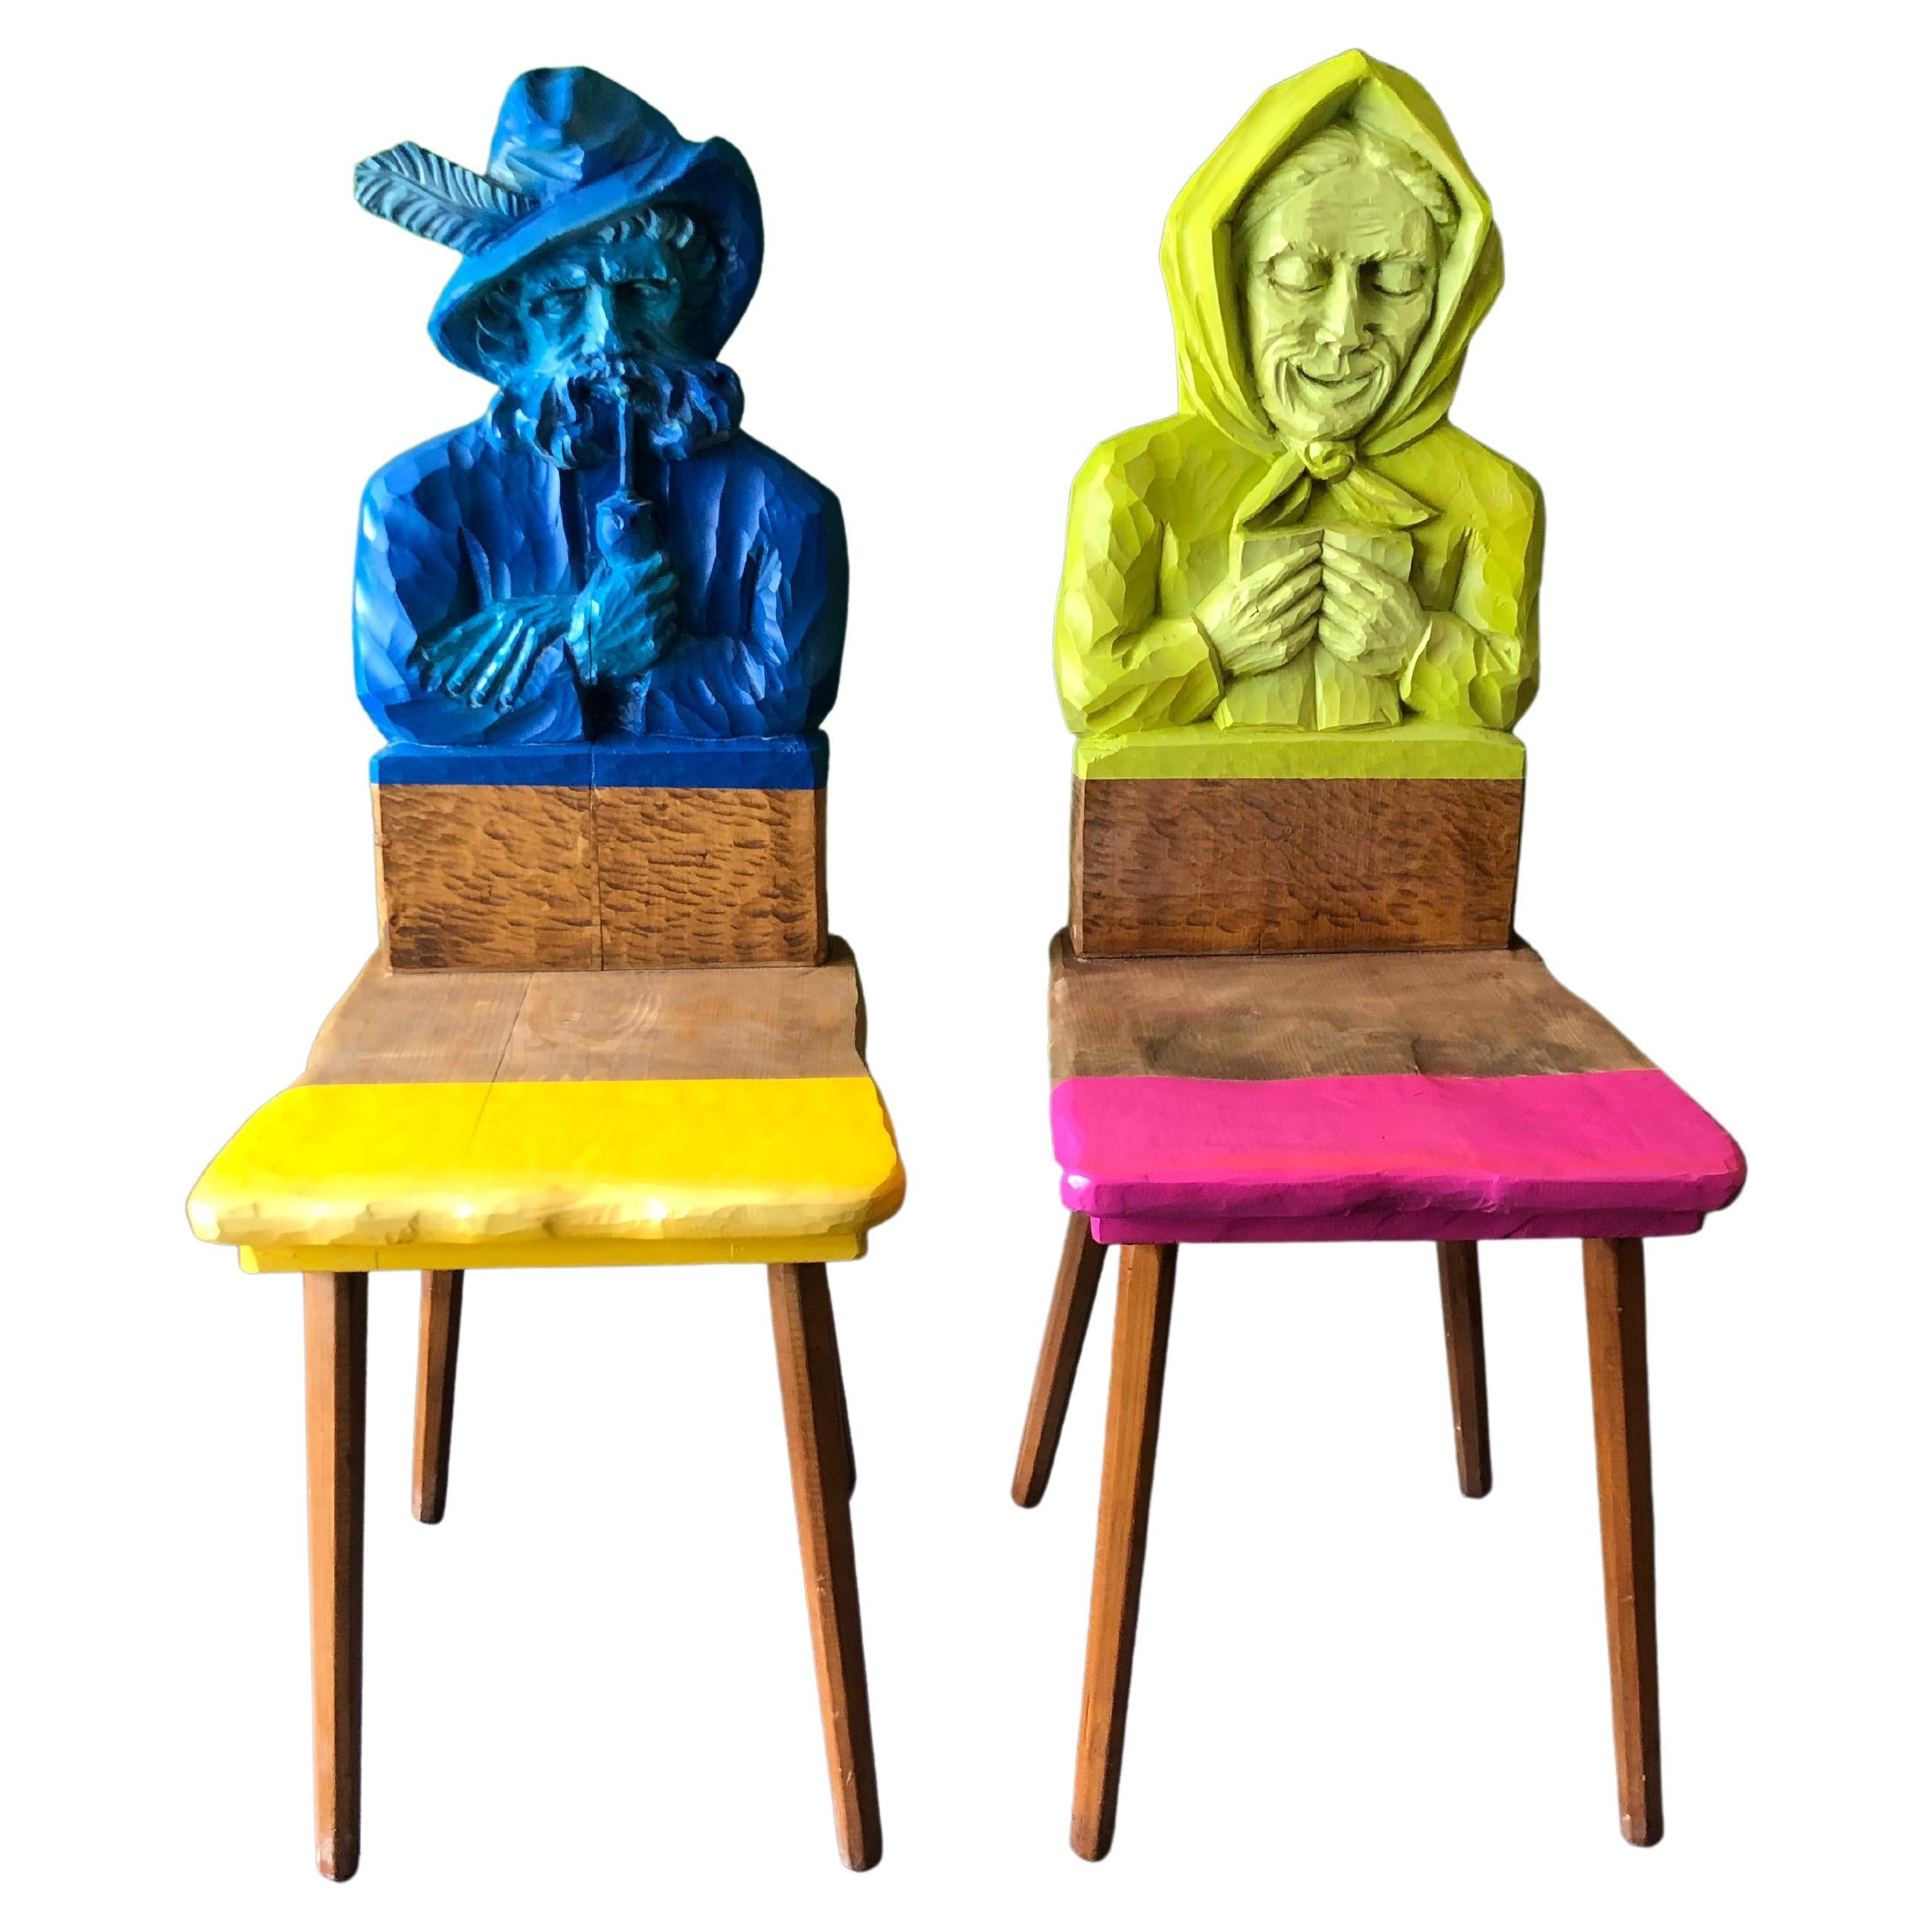 2 austrian marriage chairs/ Happy Woman Happy Life by Markus Friedrich Staab For Sale